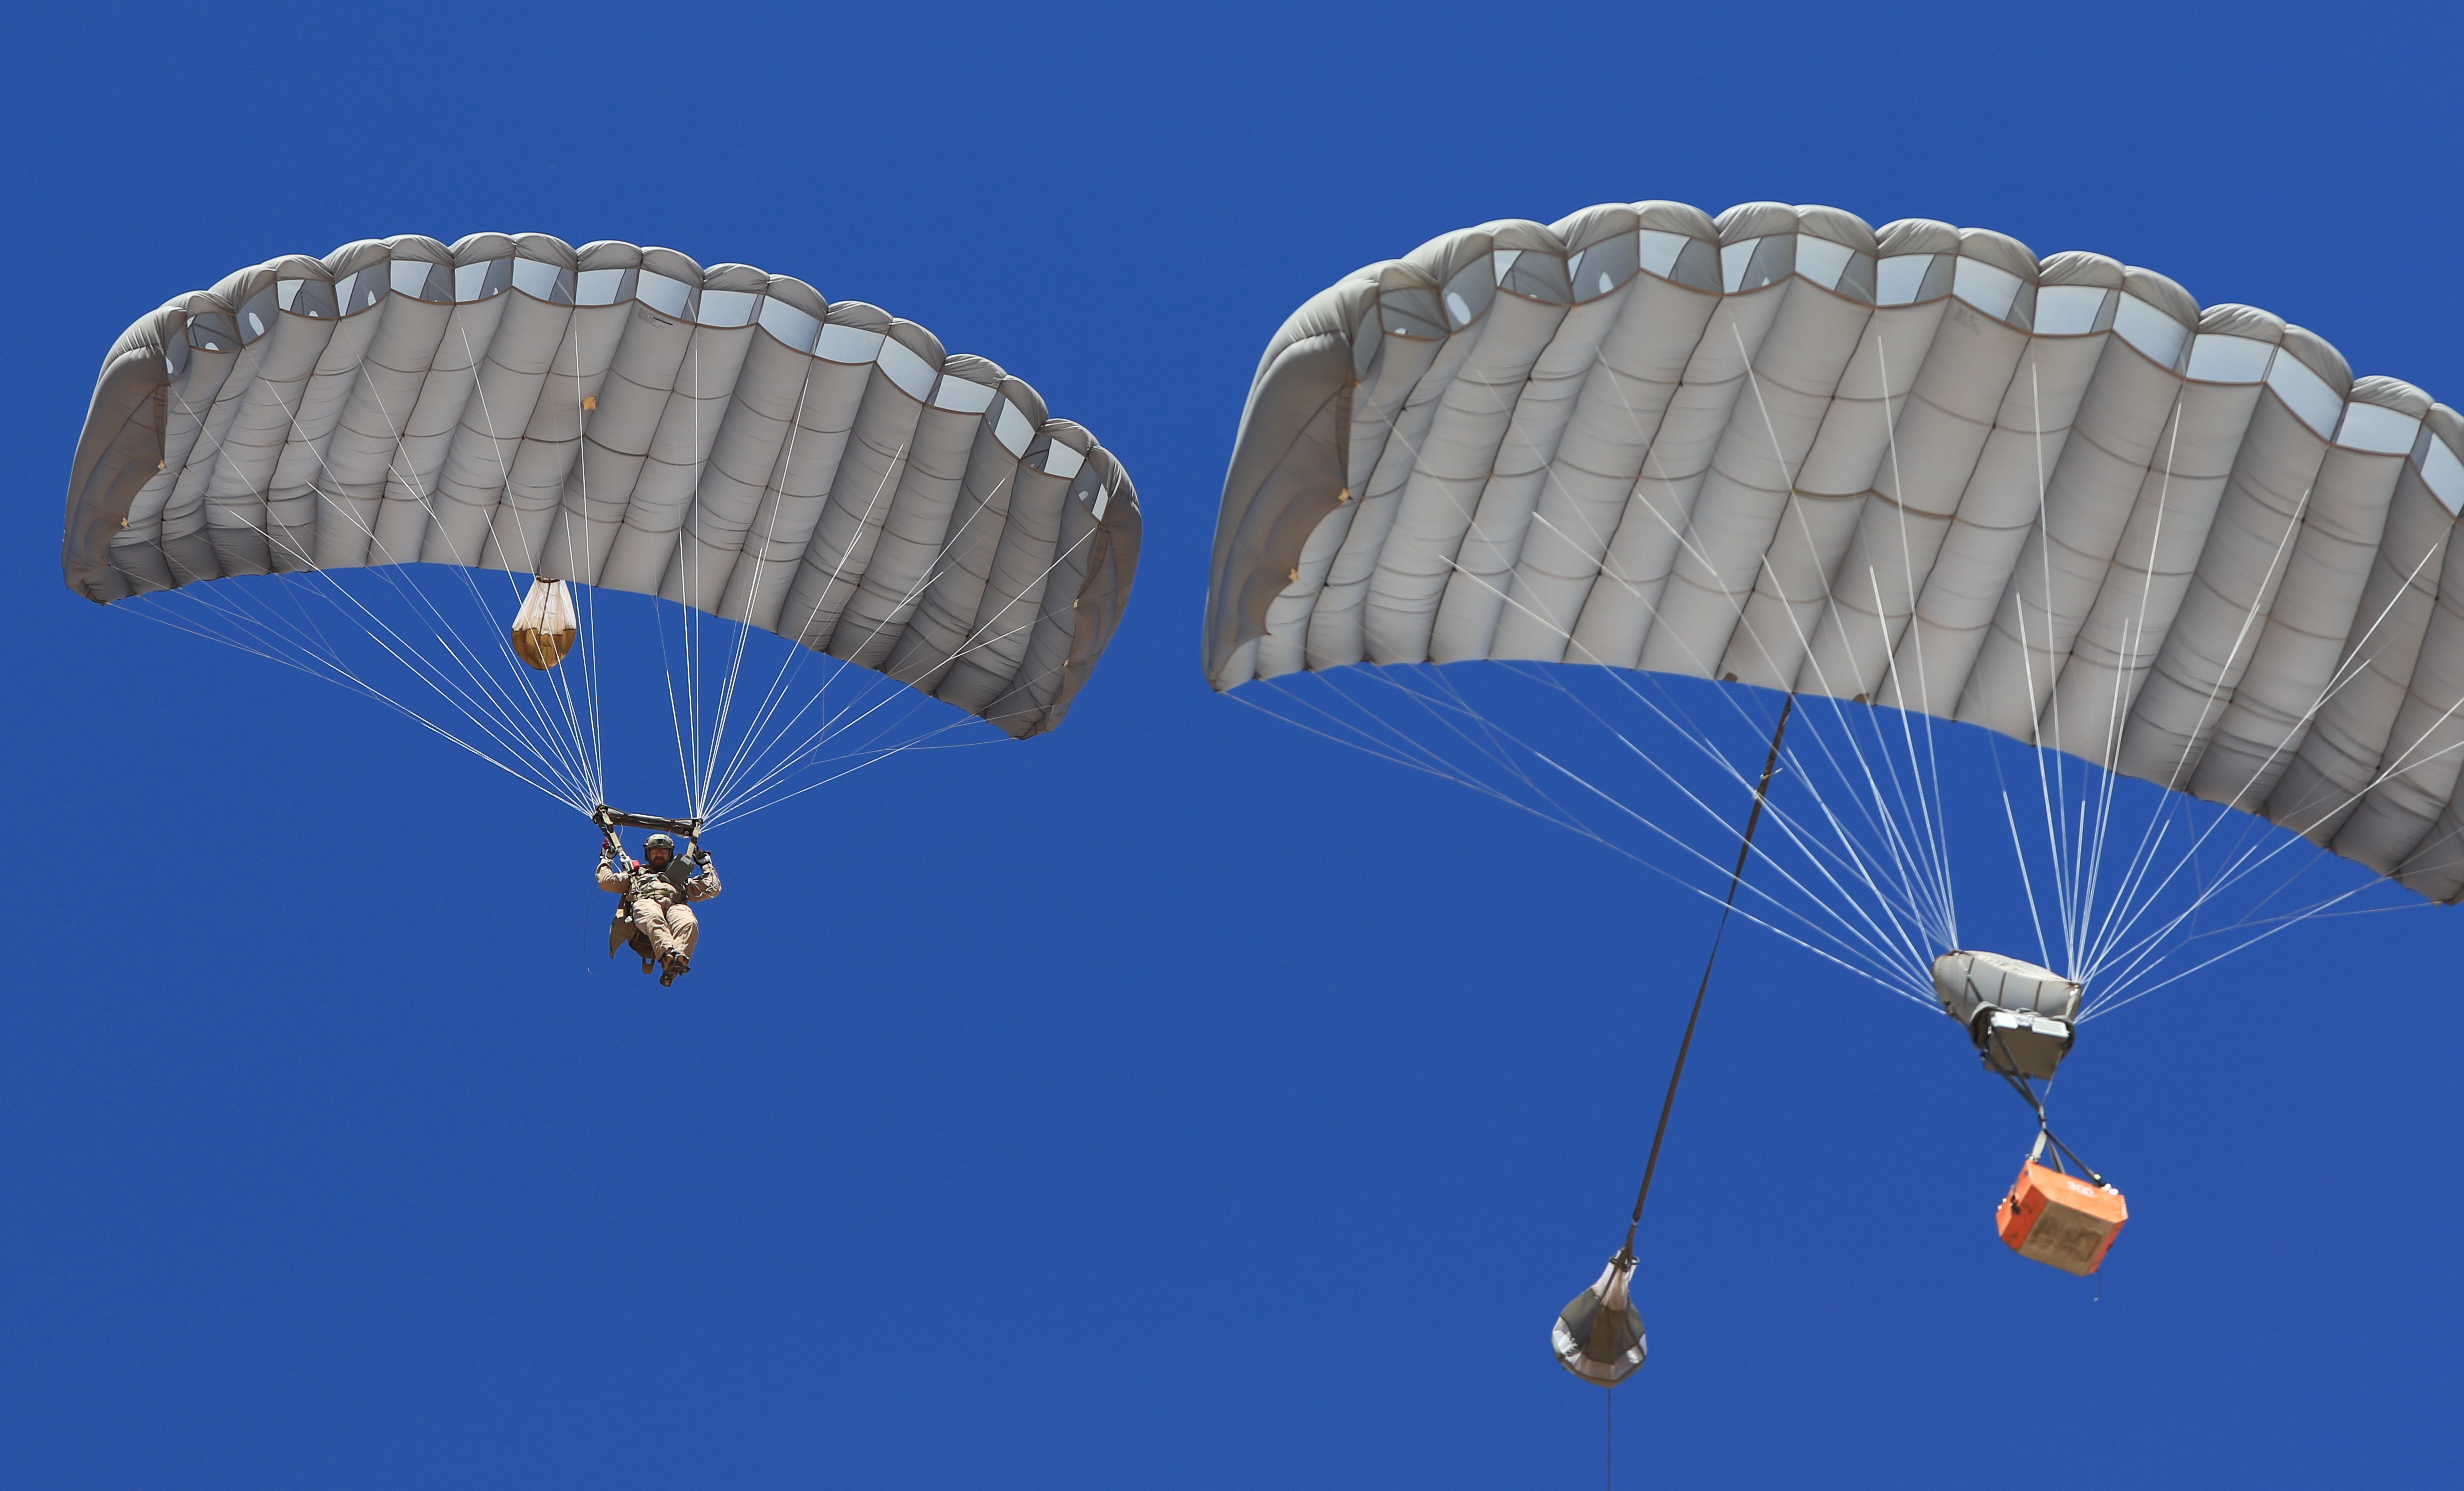 MicroFly II Military Army Cargo delivery system. JPADS / GPADS: Guided Precision Aerial Delivery System. Use with any Airborne Systems Ram Air Canopy. Soldier and orange cargo box with deployed canopies and blue sky.